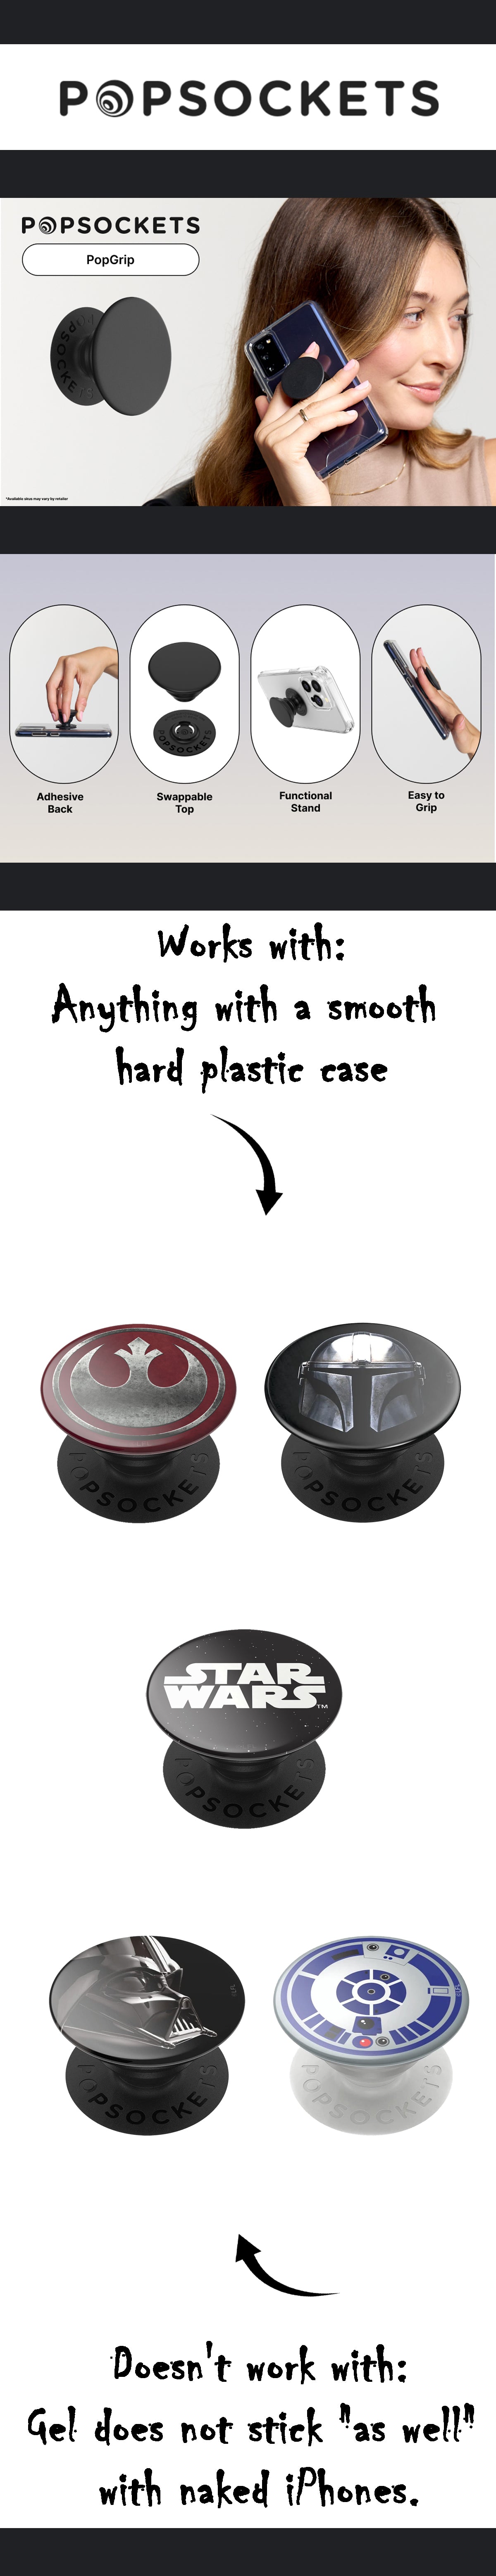 PopSockets Swappable Popgrip Licensed - Star Wars Series